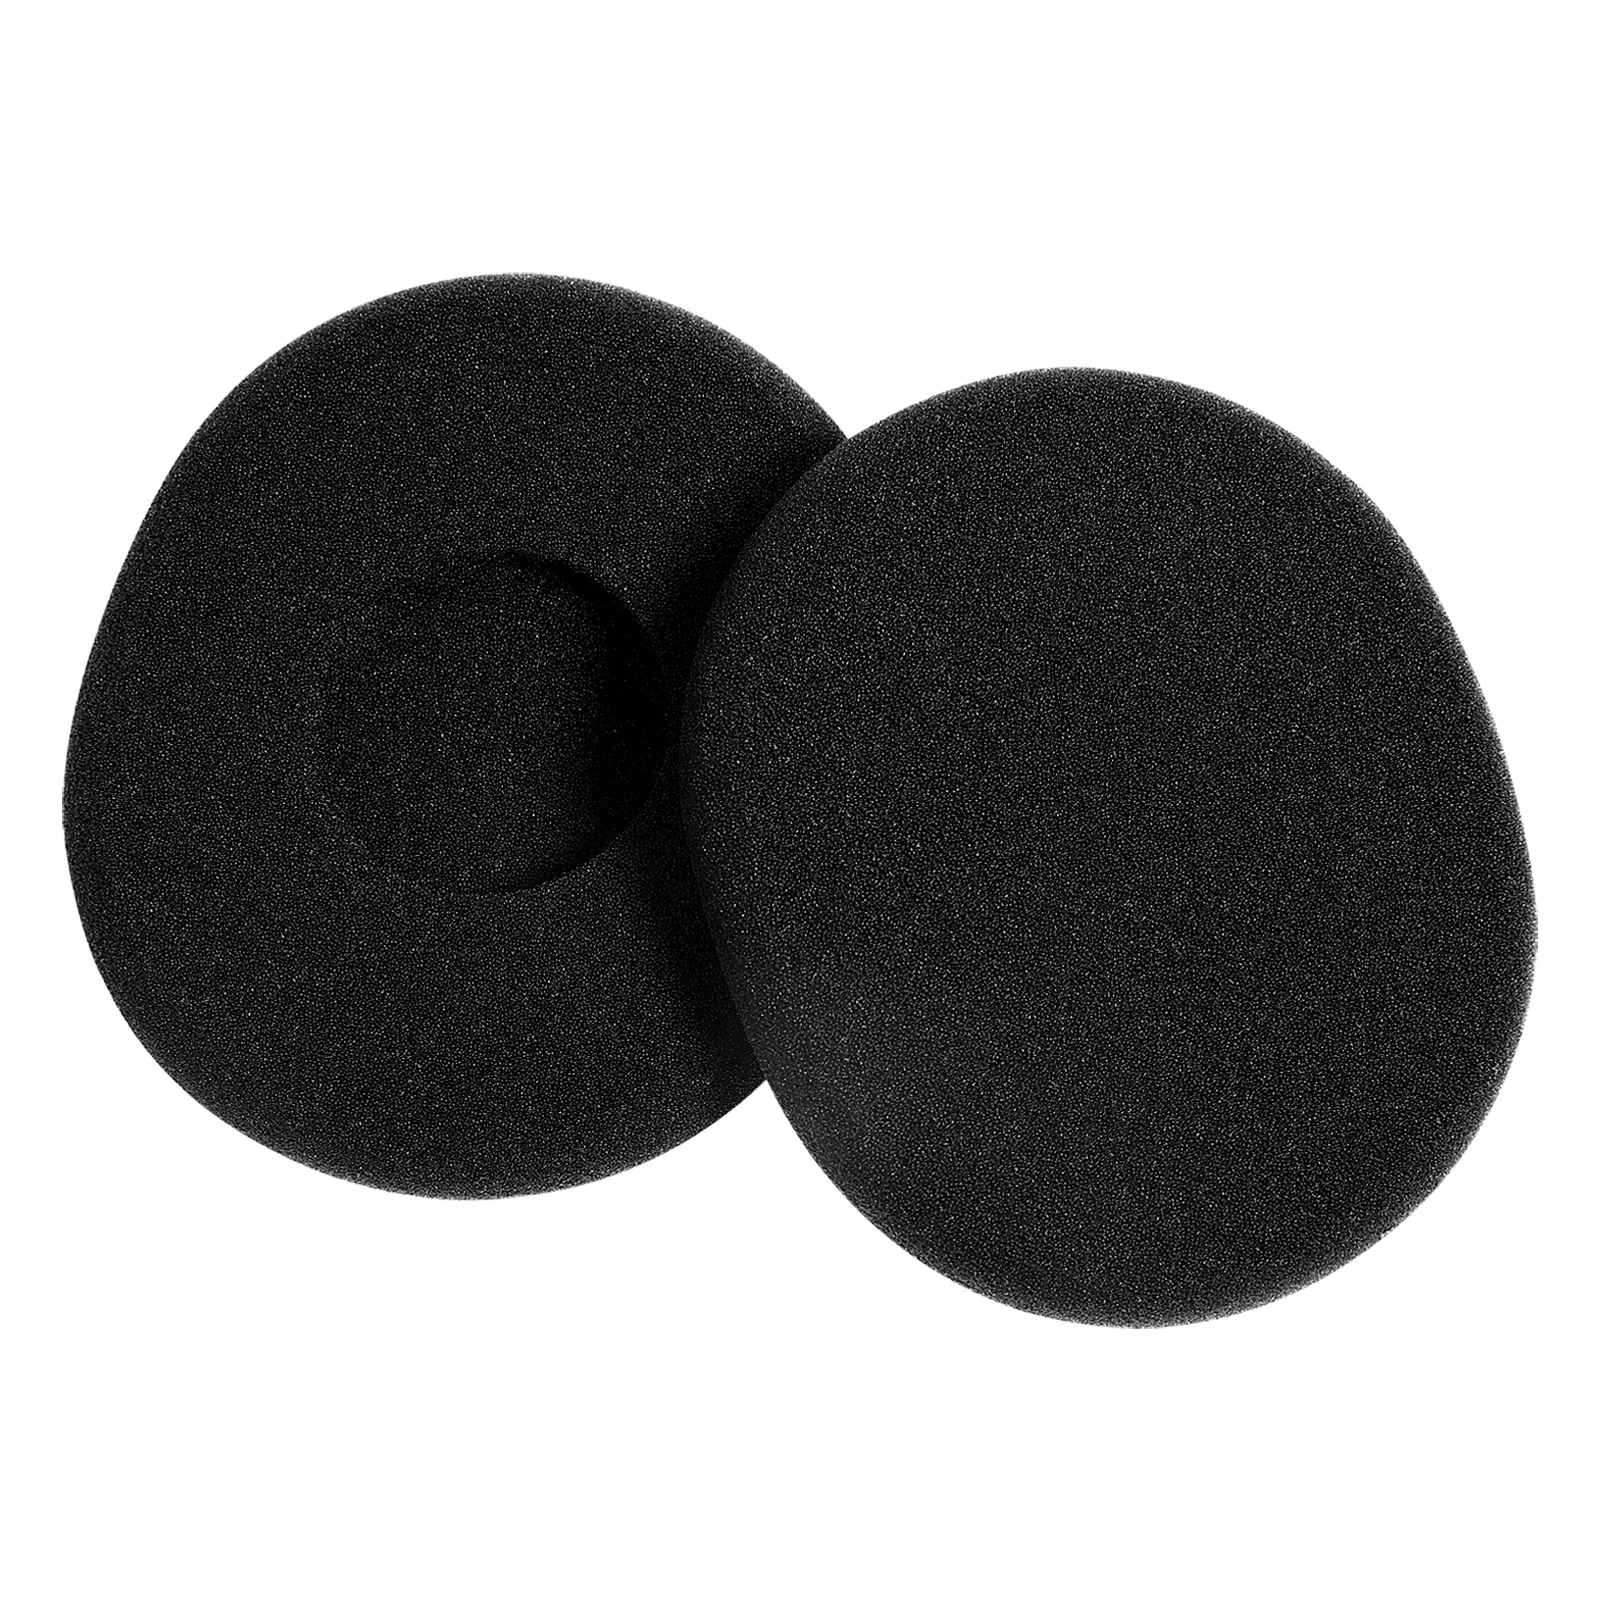 Headphone Ear Covers Sponge Headphone Set Crusher Wireless Replacement Pads Headphone Replacement Pads Earpad Covers